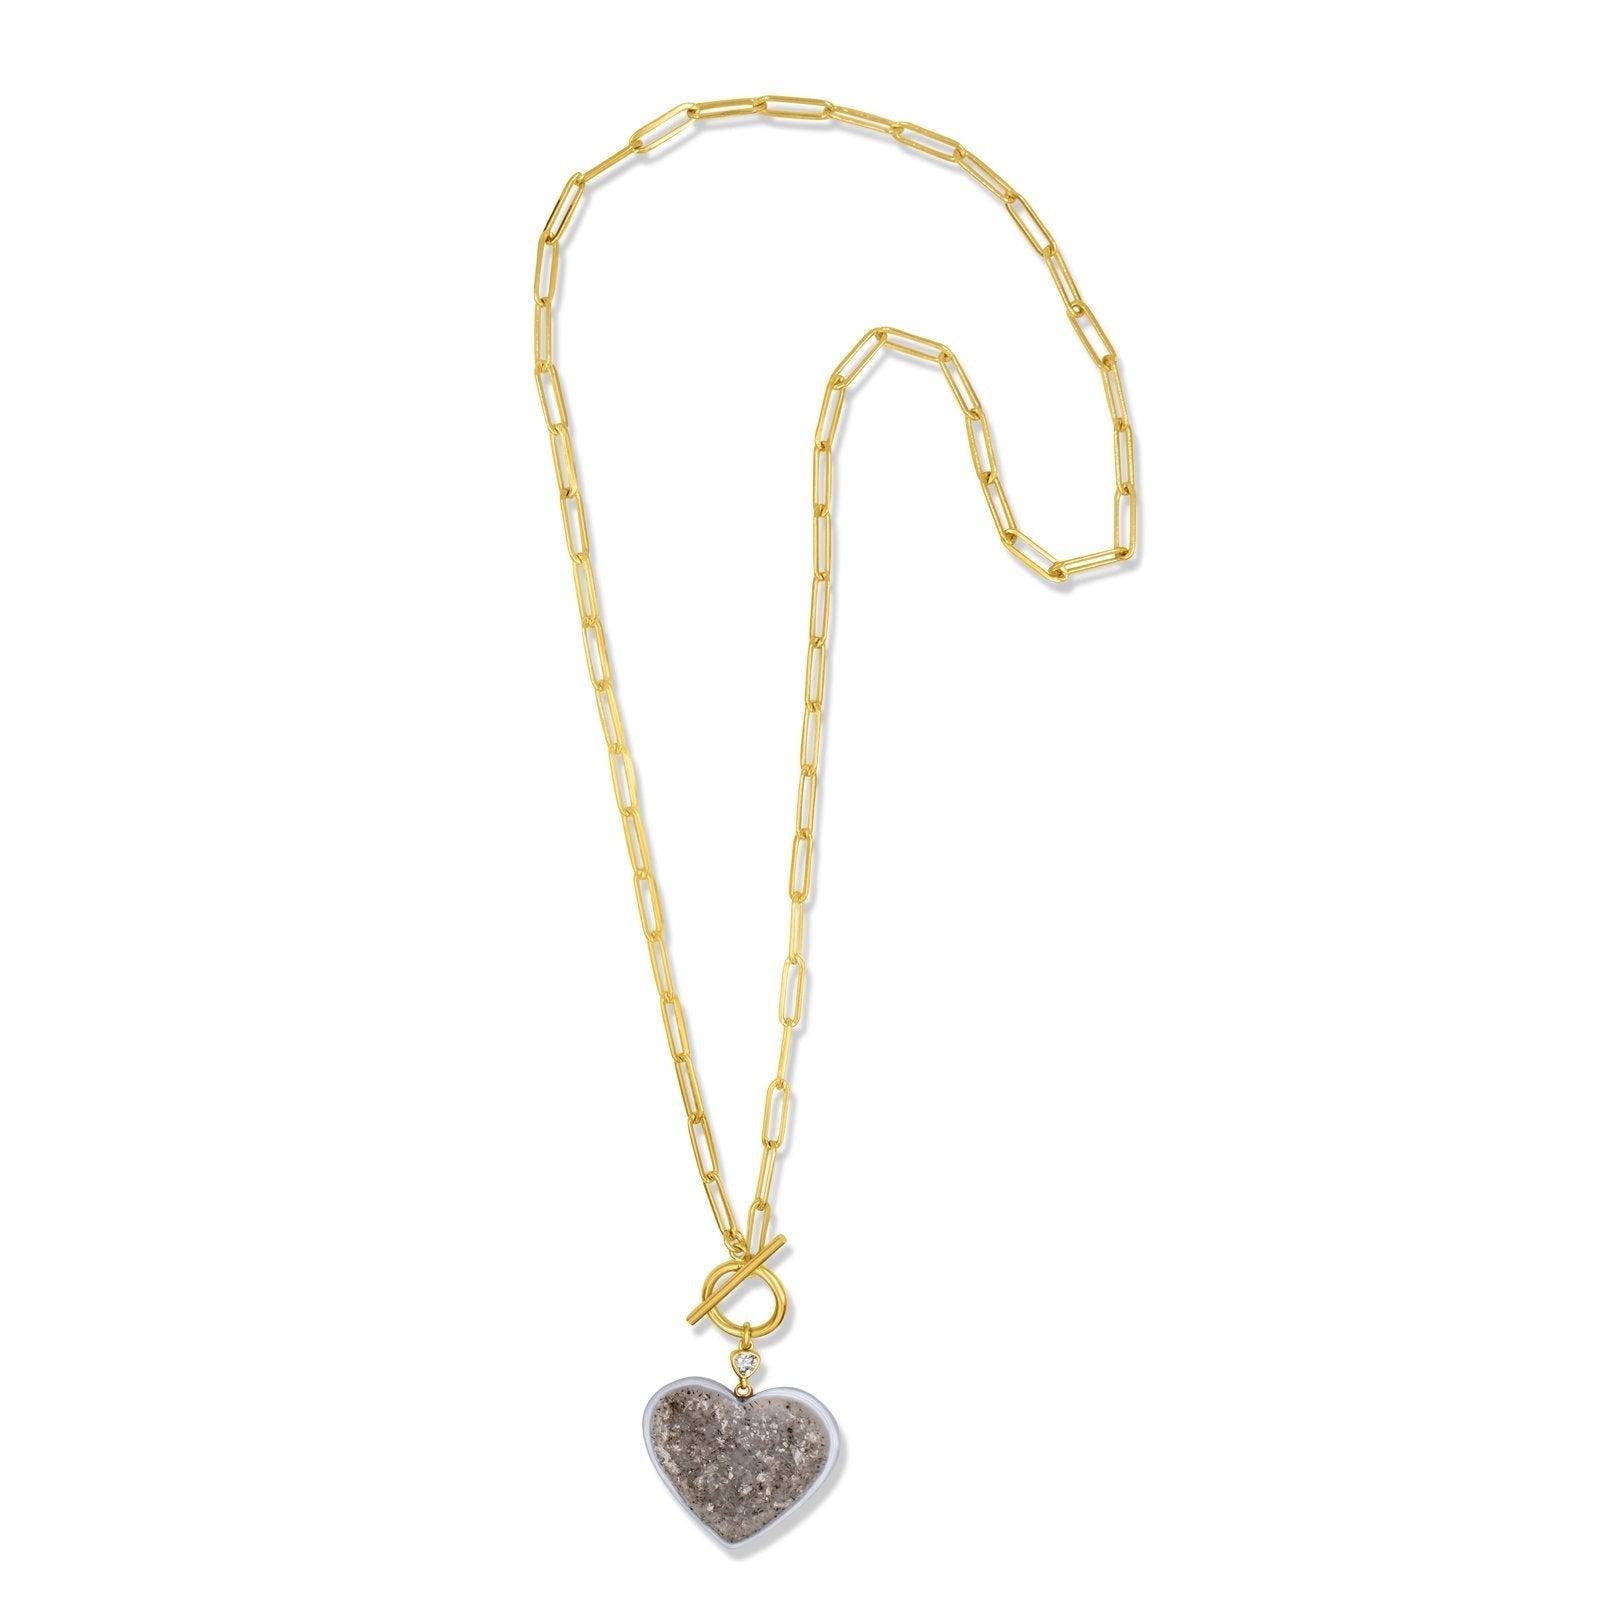 Gold Filled - Druzy Quartz Heart Necklace - Camille Jewelry